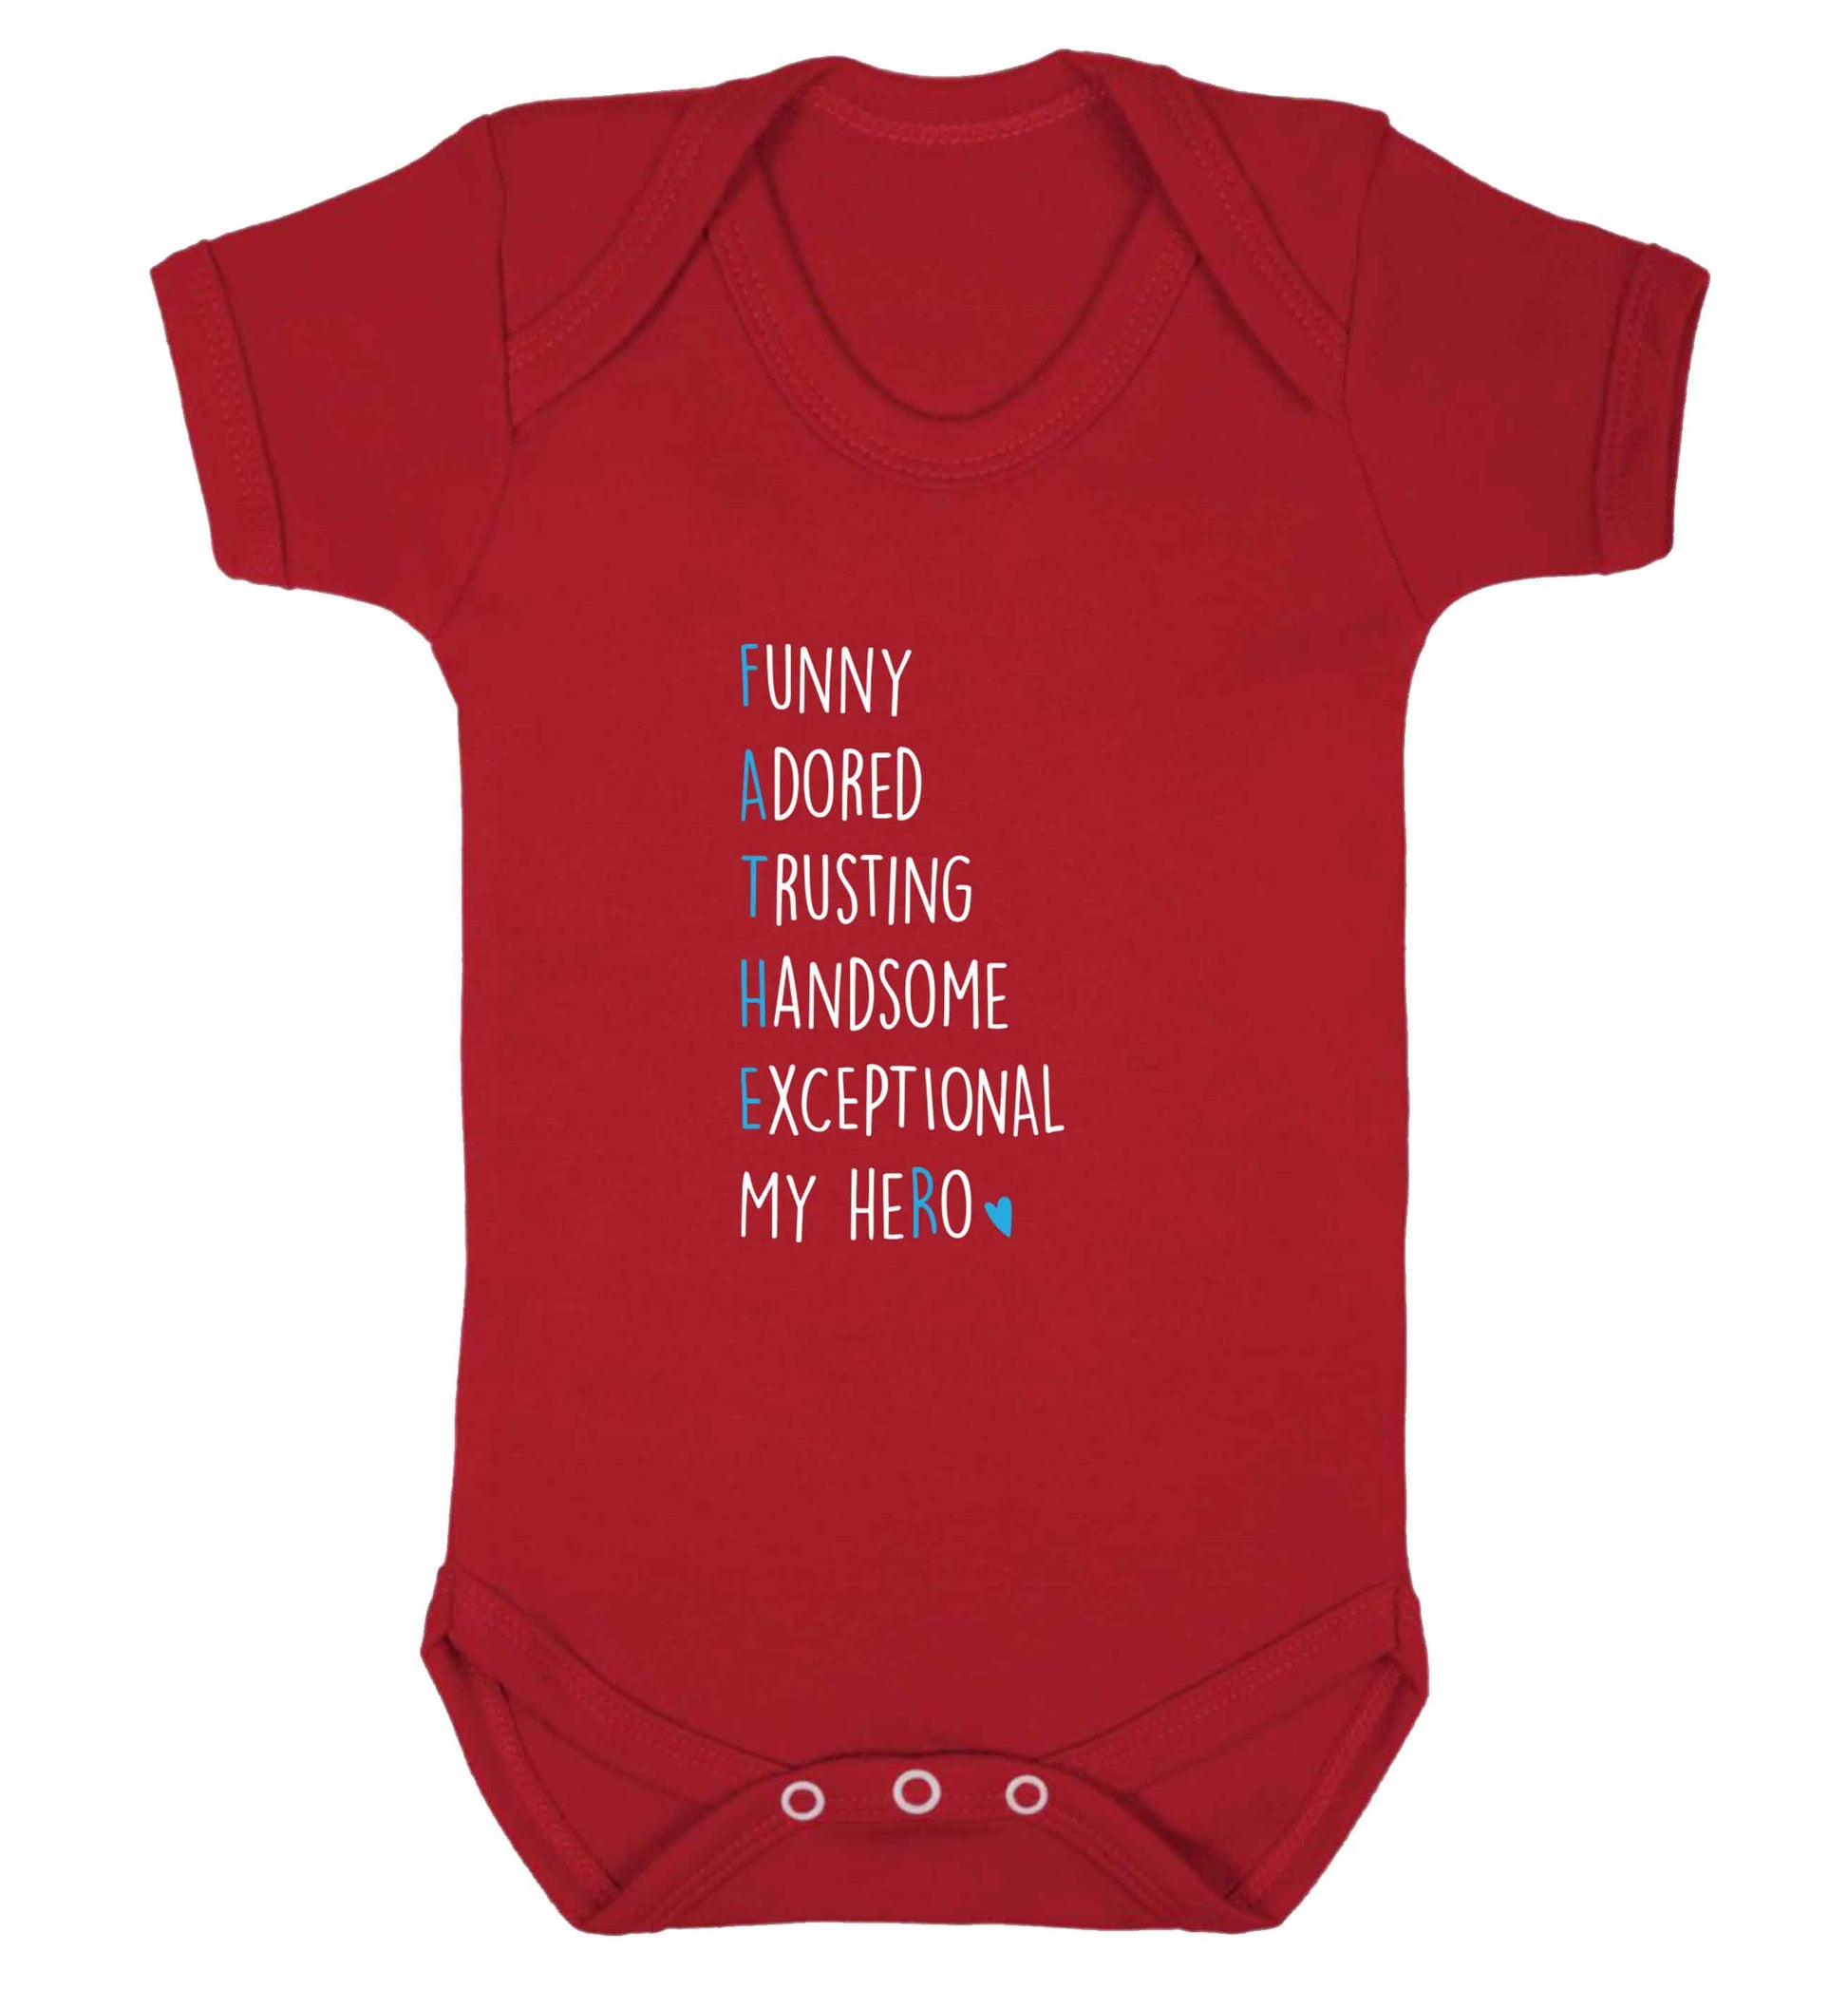 Father, funny adored trusting handsome exceptional my hero baby vest red 18-24 months